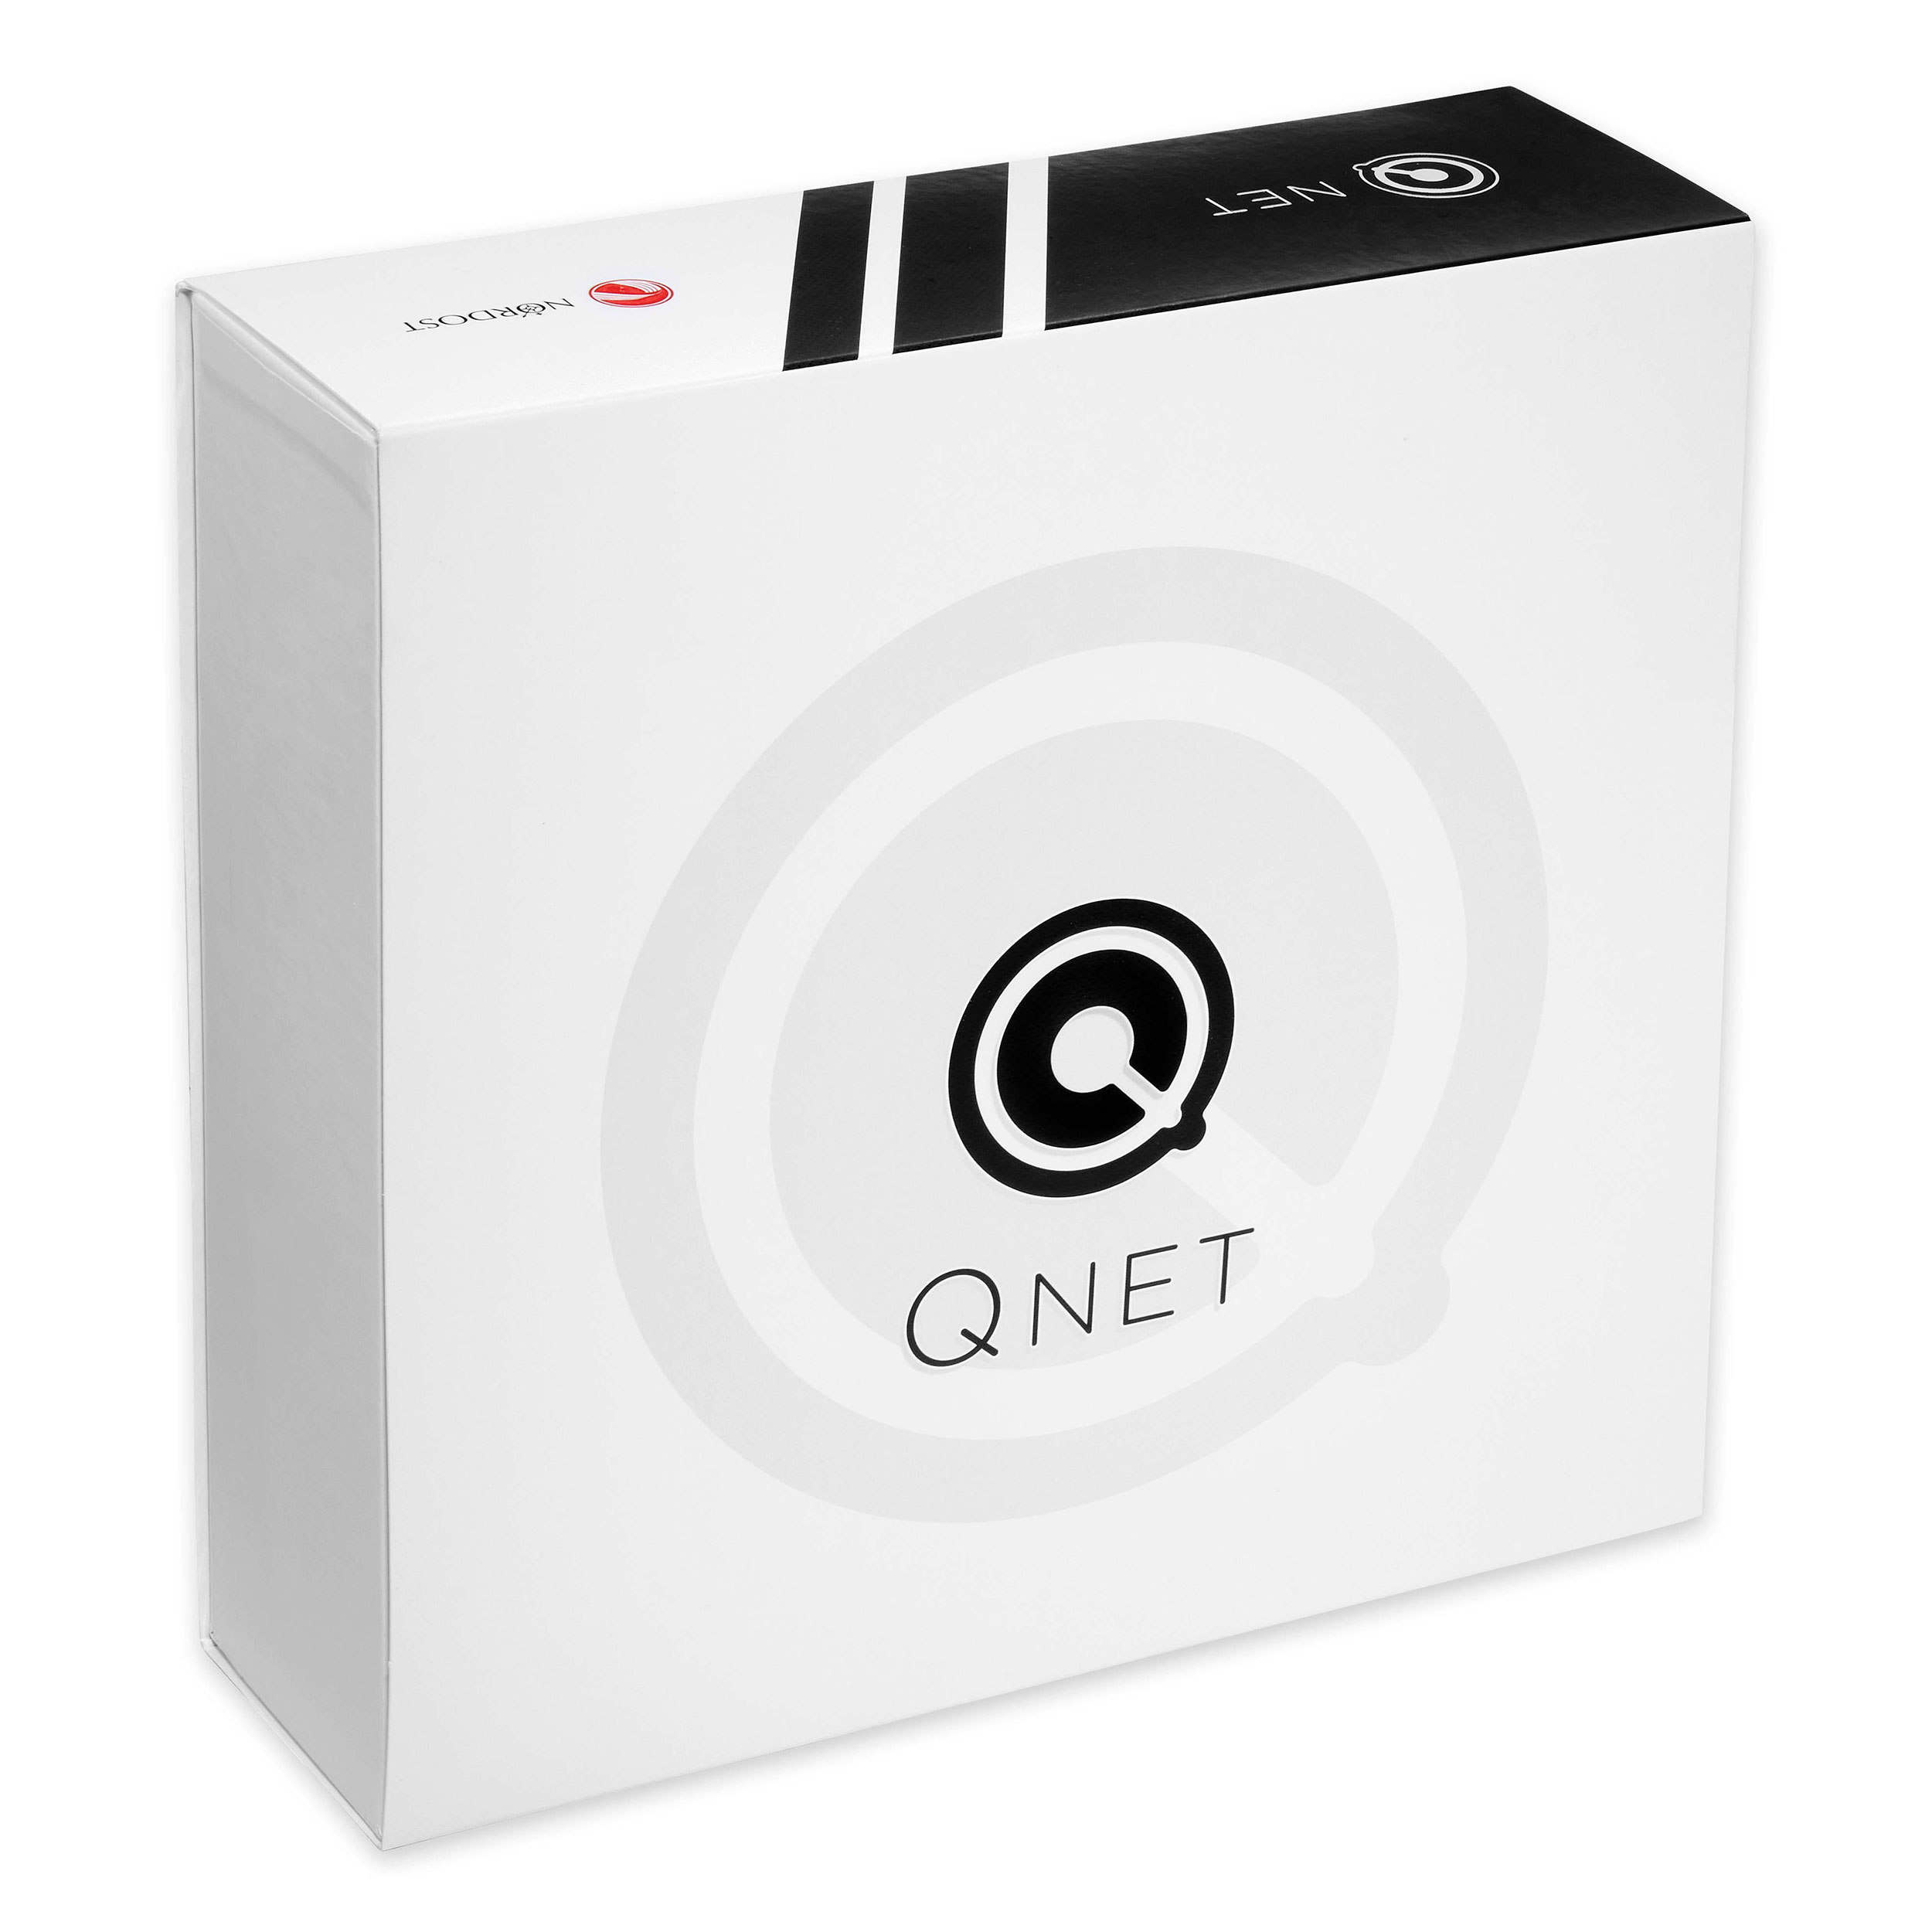 <p align="center">QNET Packaging </p>